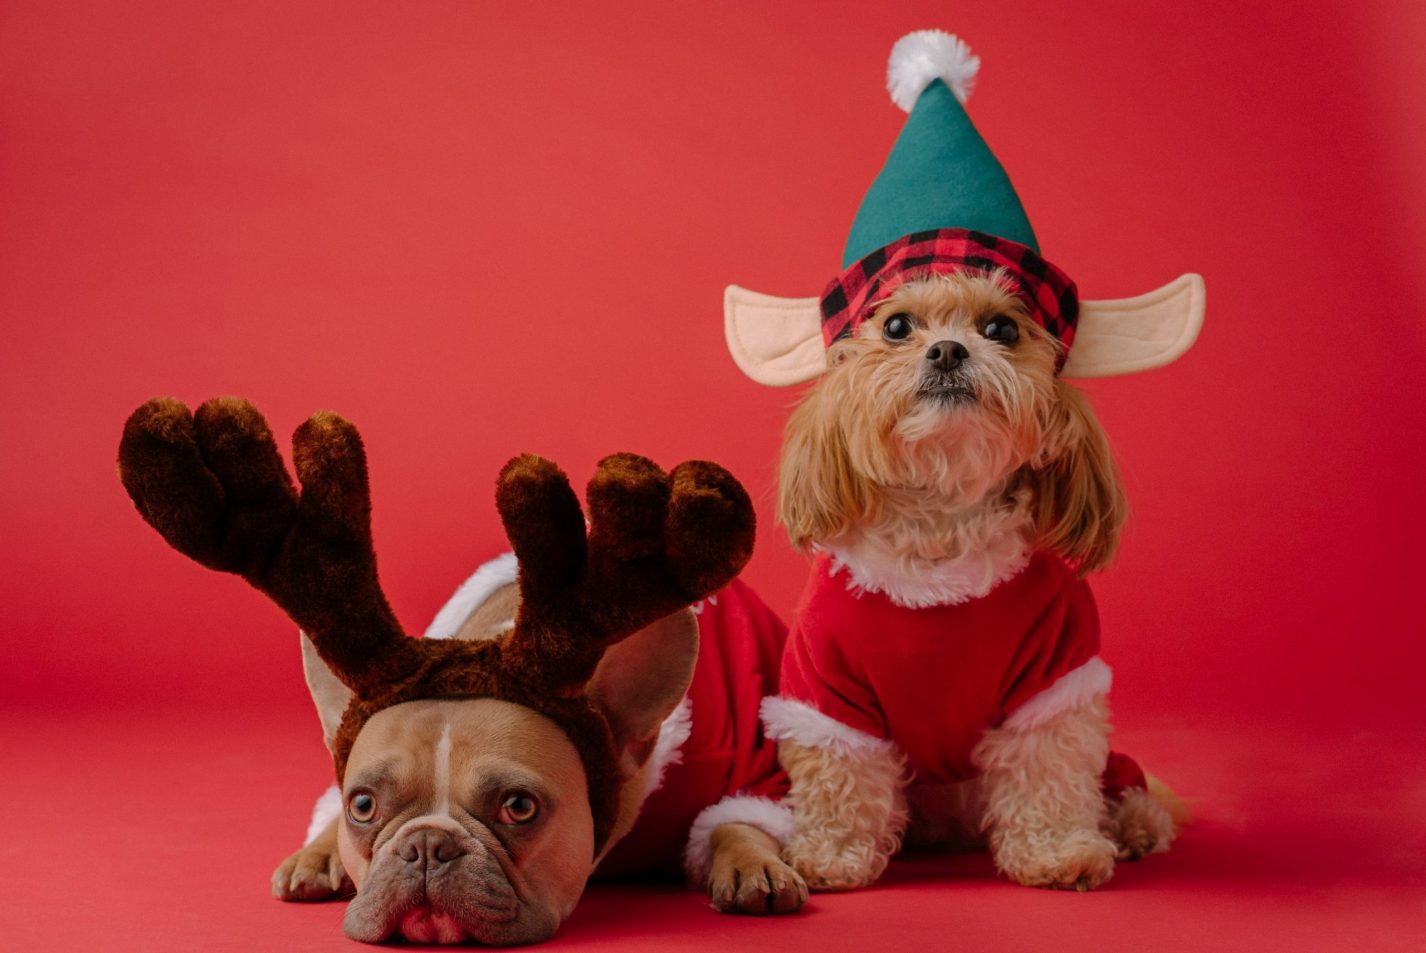 a picture showing Christmas dogs meaning Christmas is coming